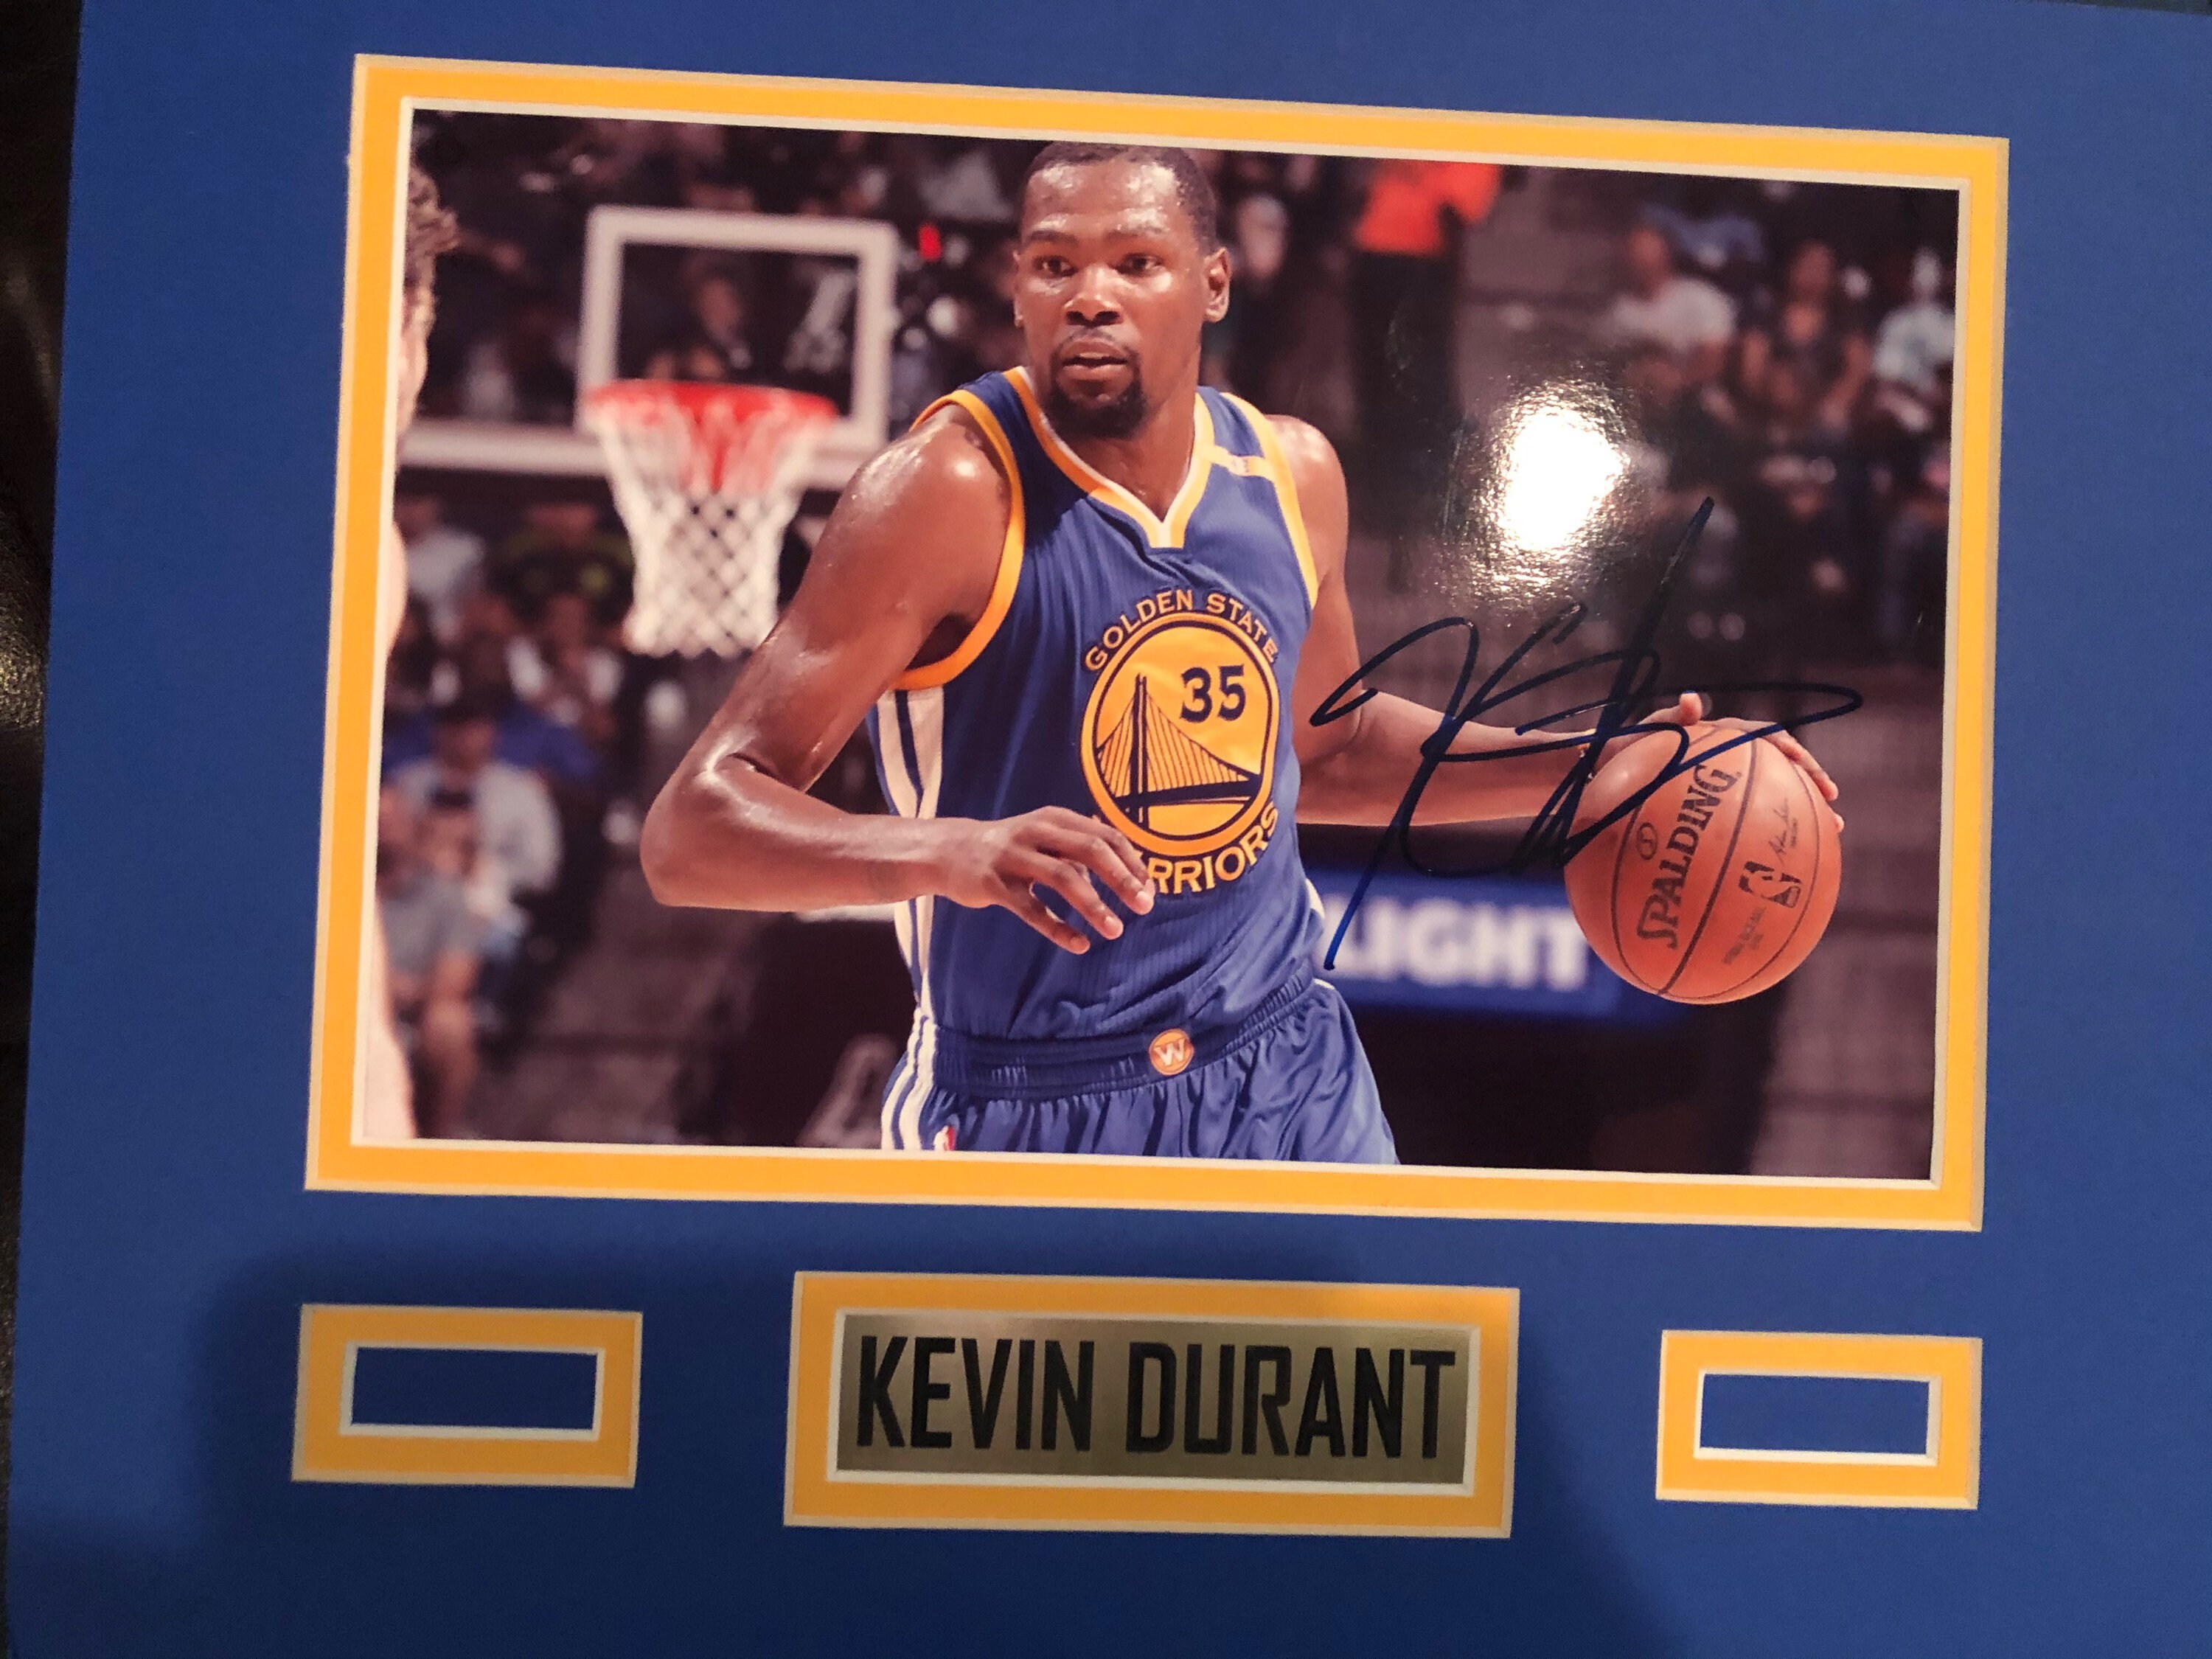 Kevin Durant Golden State Warriors NBA MVP Champ Signed Framed Photo in 11x14